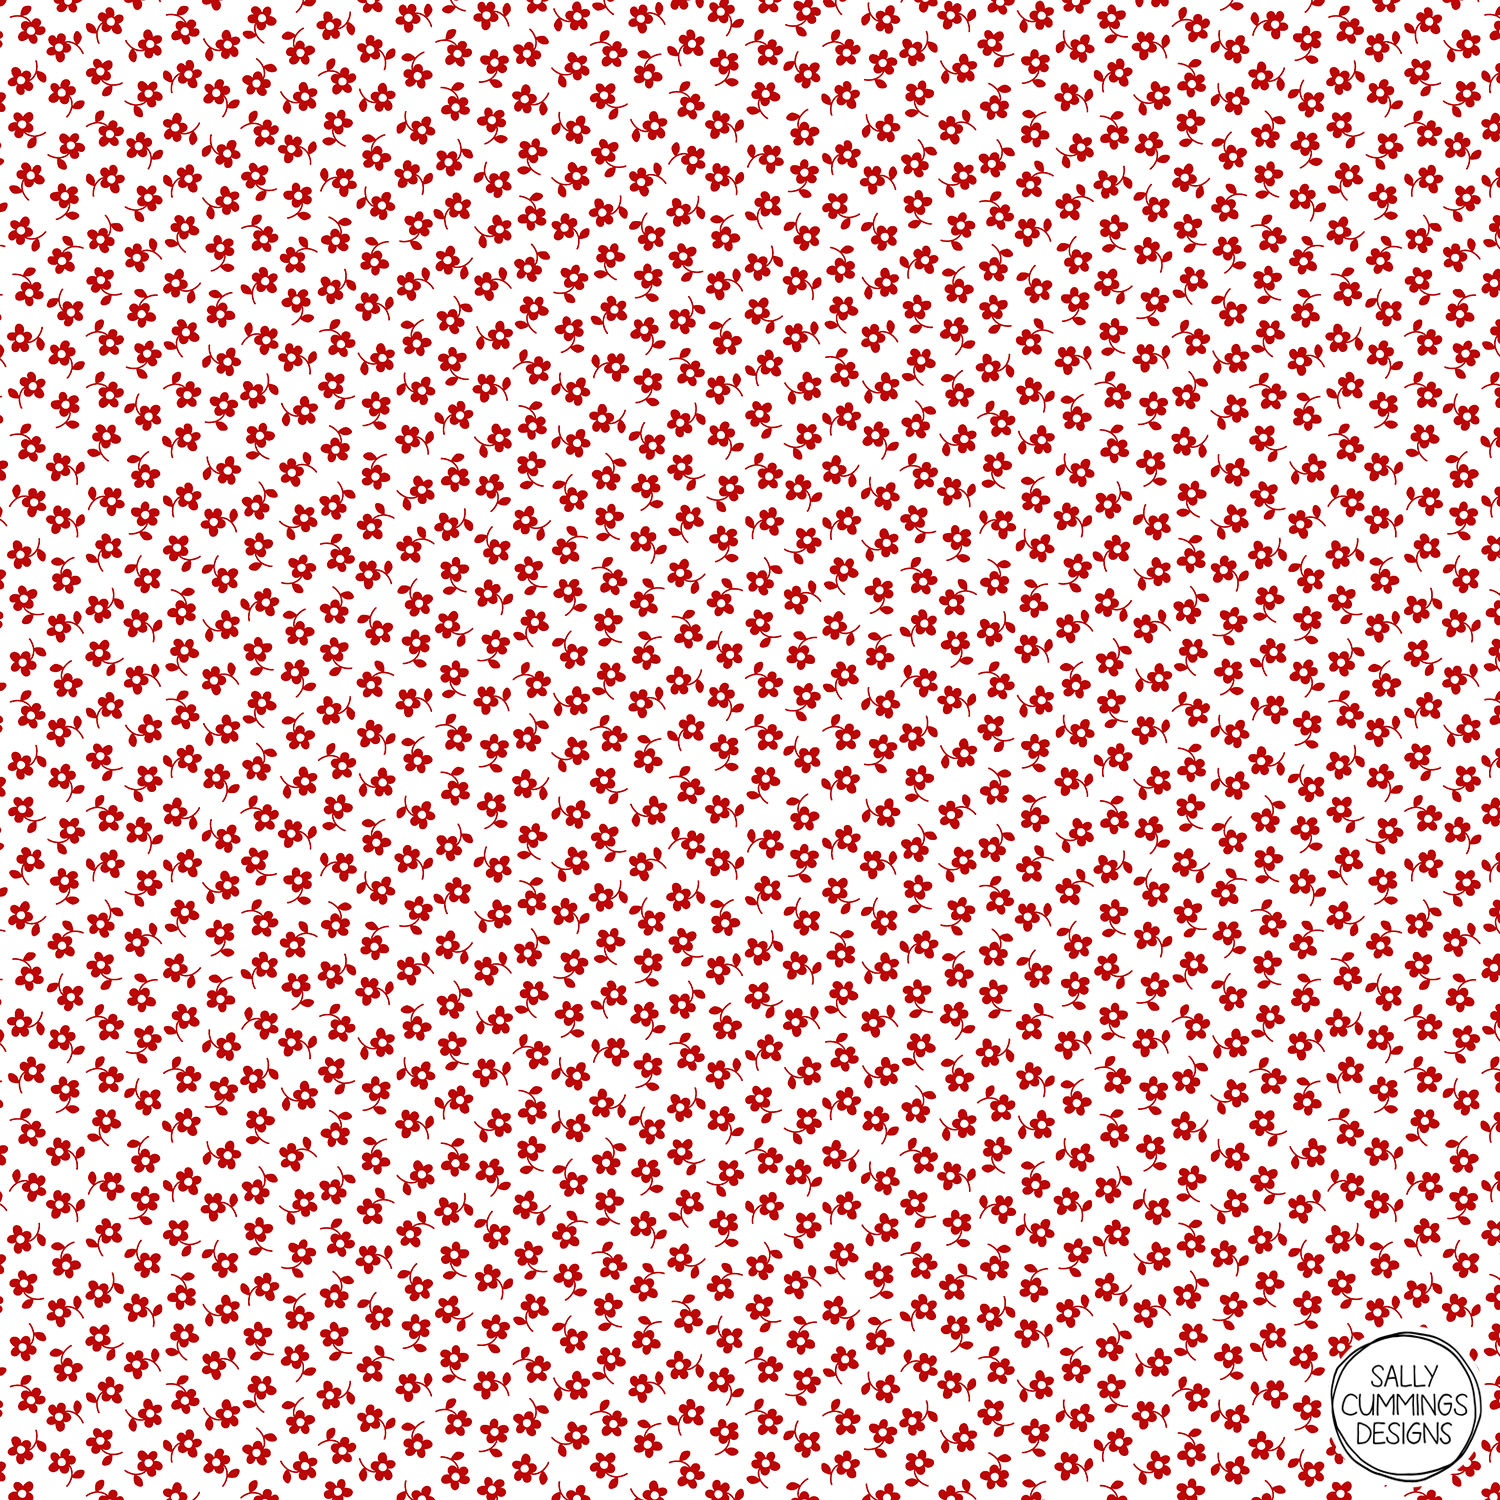 Sally Cummings Designs - Forget Me Nots Pattern (Red on White)